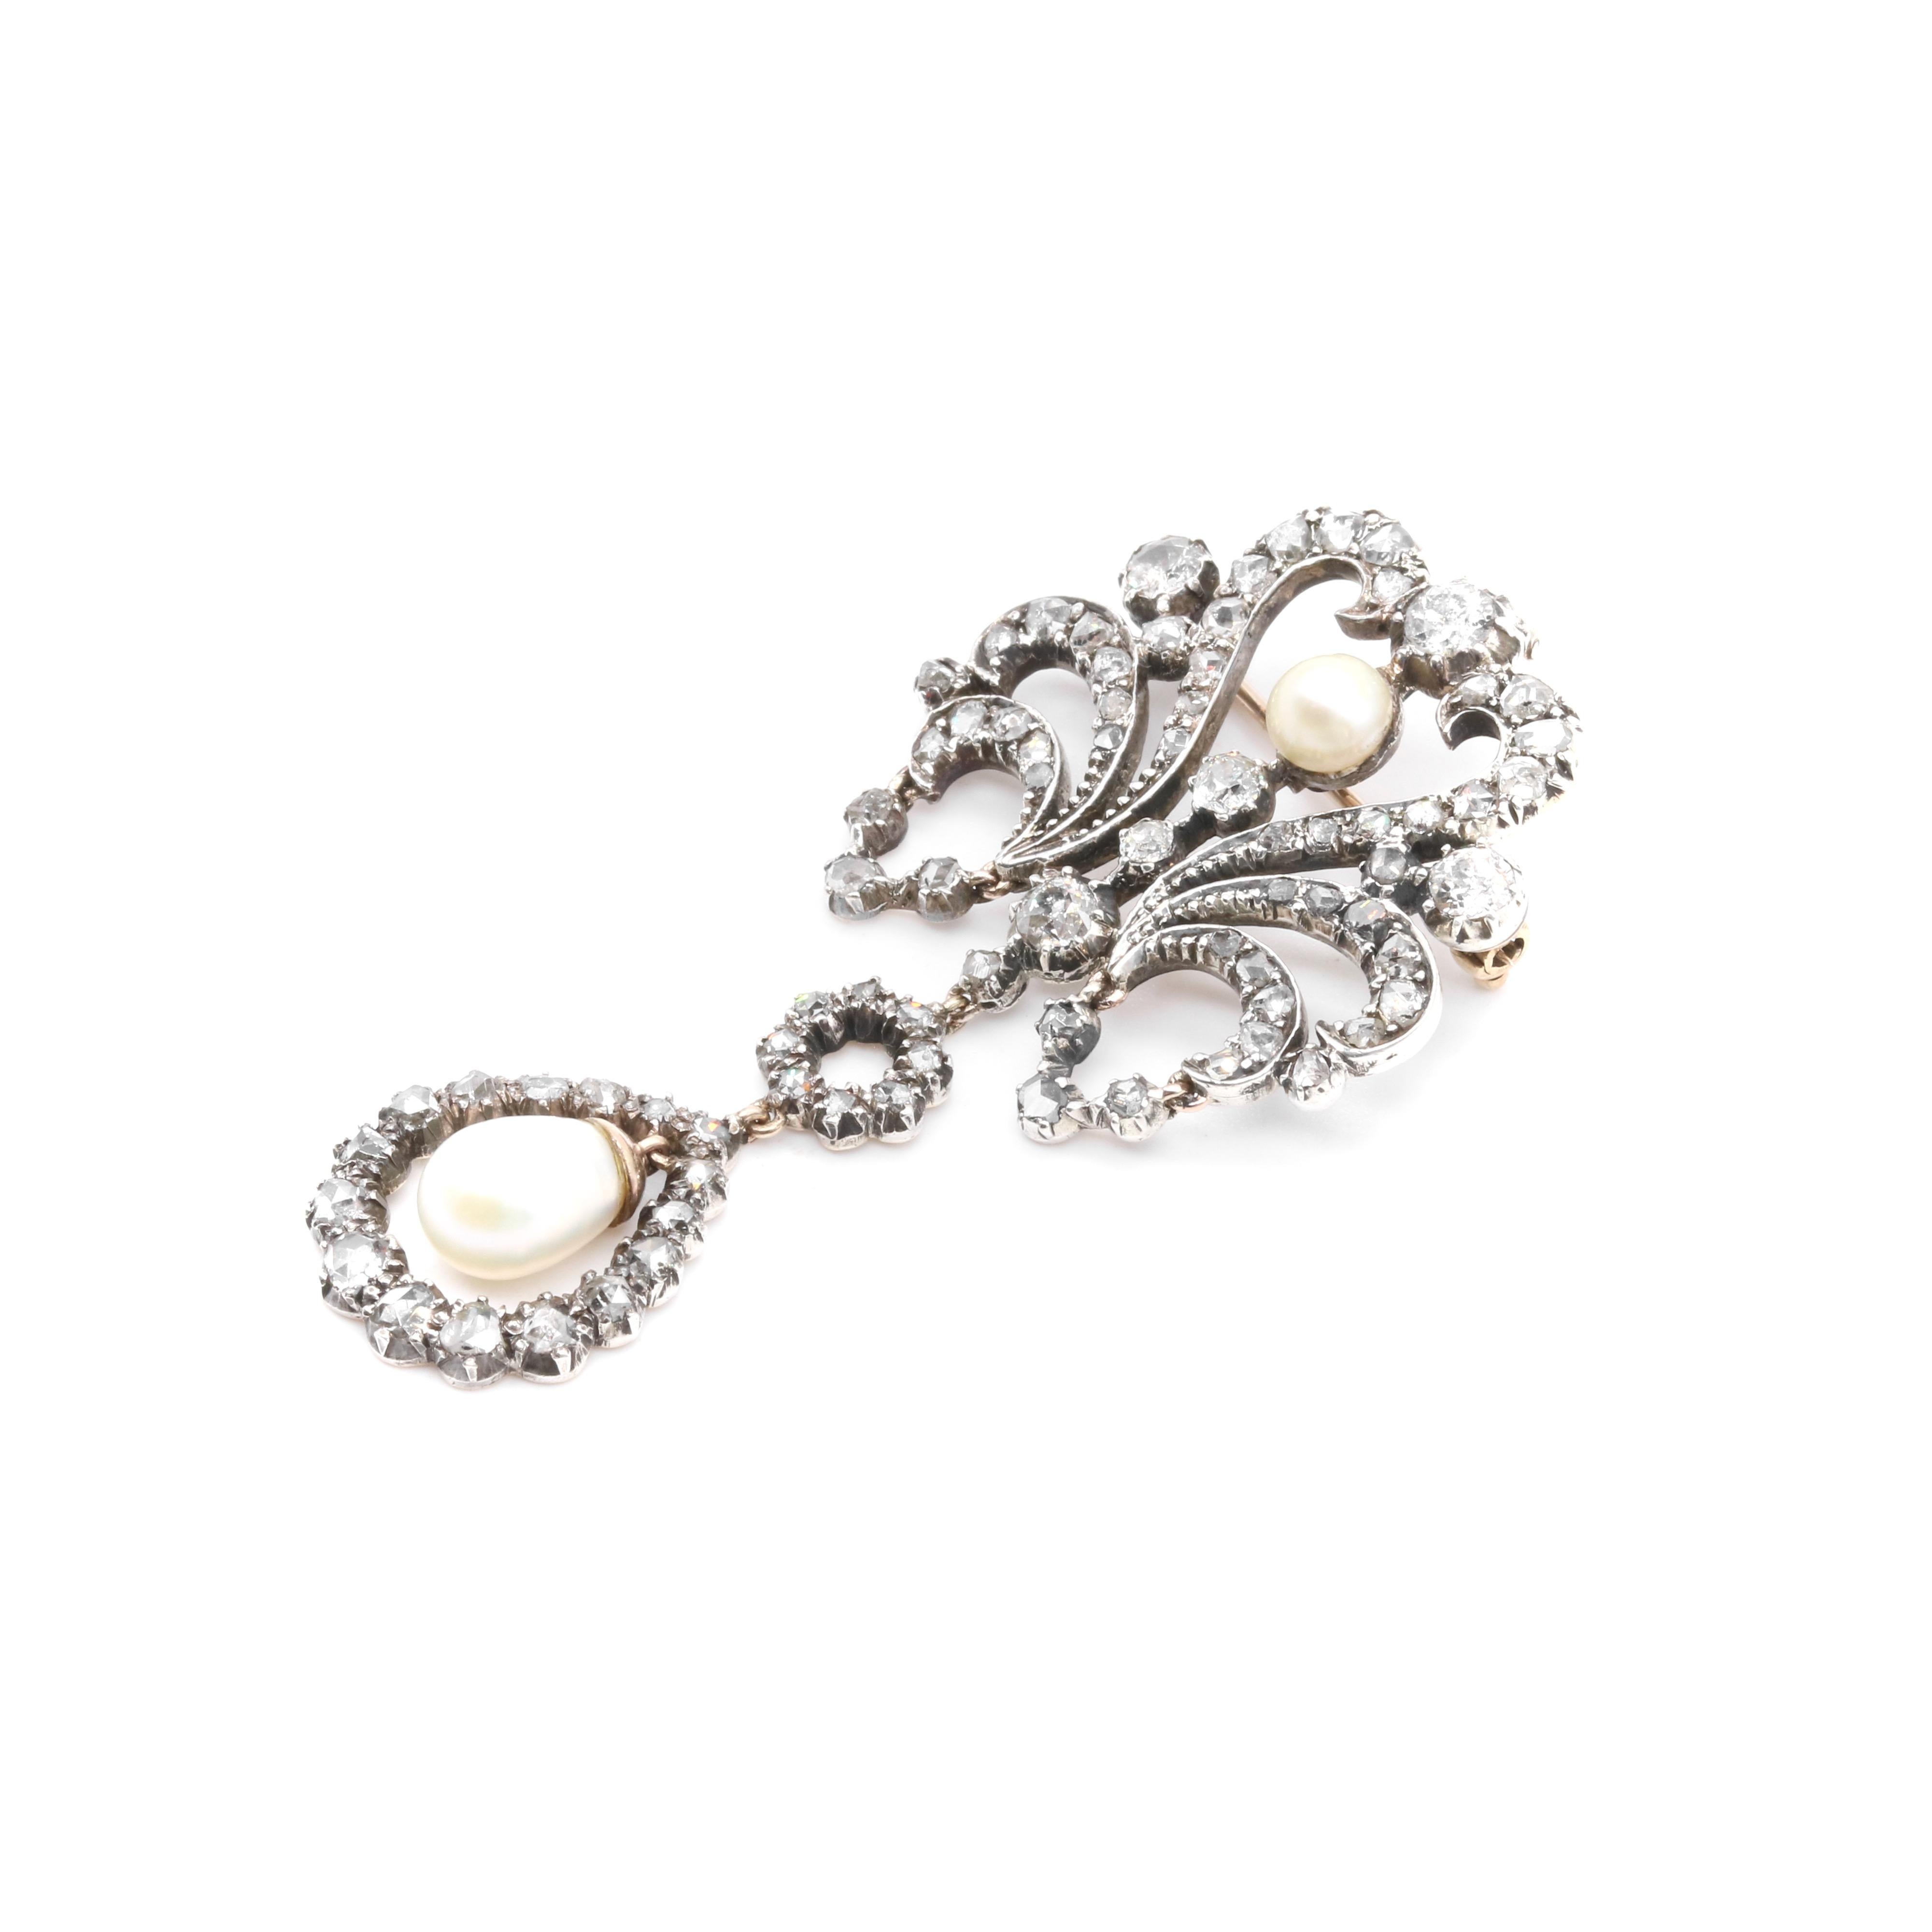 Antique Victorian Yellow Gold and Silver 1.74ctw Diamond & Pearl Palmette Brooch For Sale 3